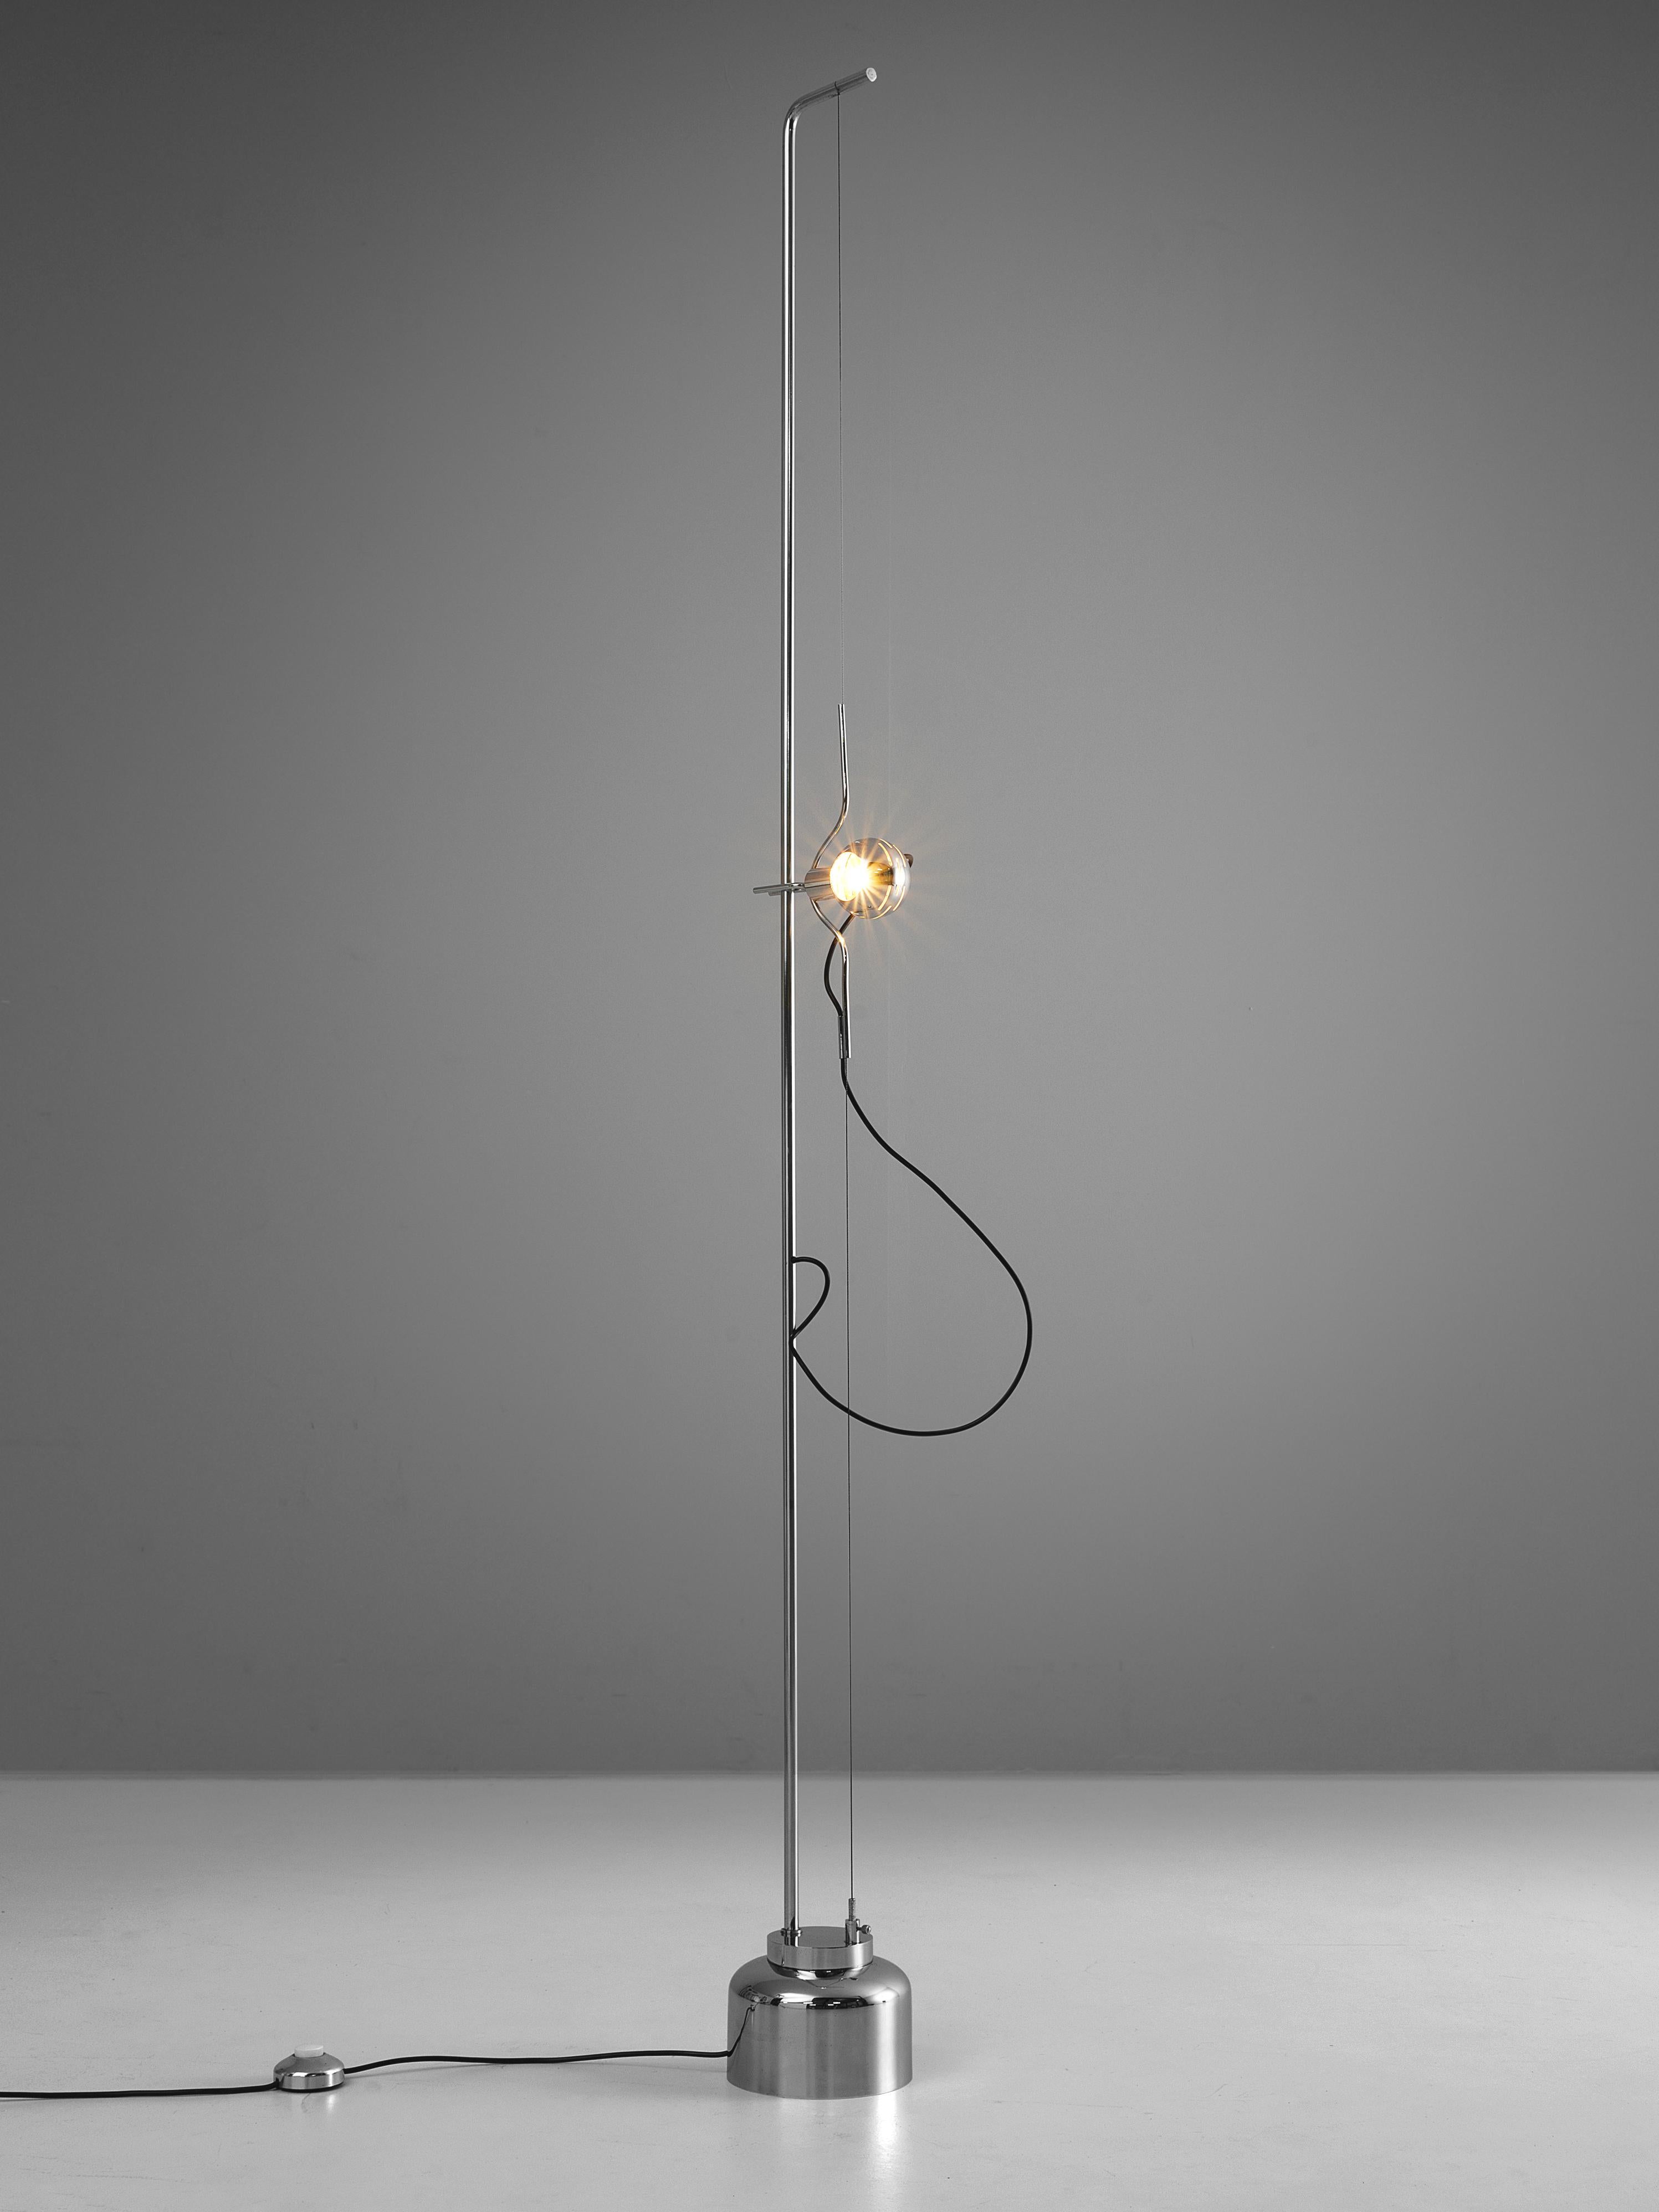 Angelo Lelli for Arredoluce, 'Filosfera' floor lamp, chromium-plated metal, metal wire, painted metal, Italy, 1970s 

Angelo Lelli designed the 'Filosfera' floor lamp for Arredoluce in the 1970s. On a round chrome base is a thin chrome stem